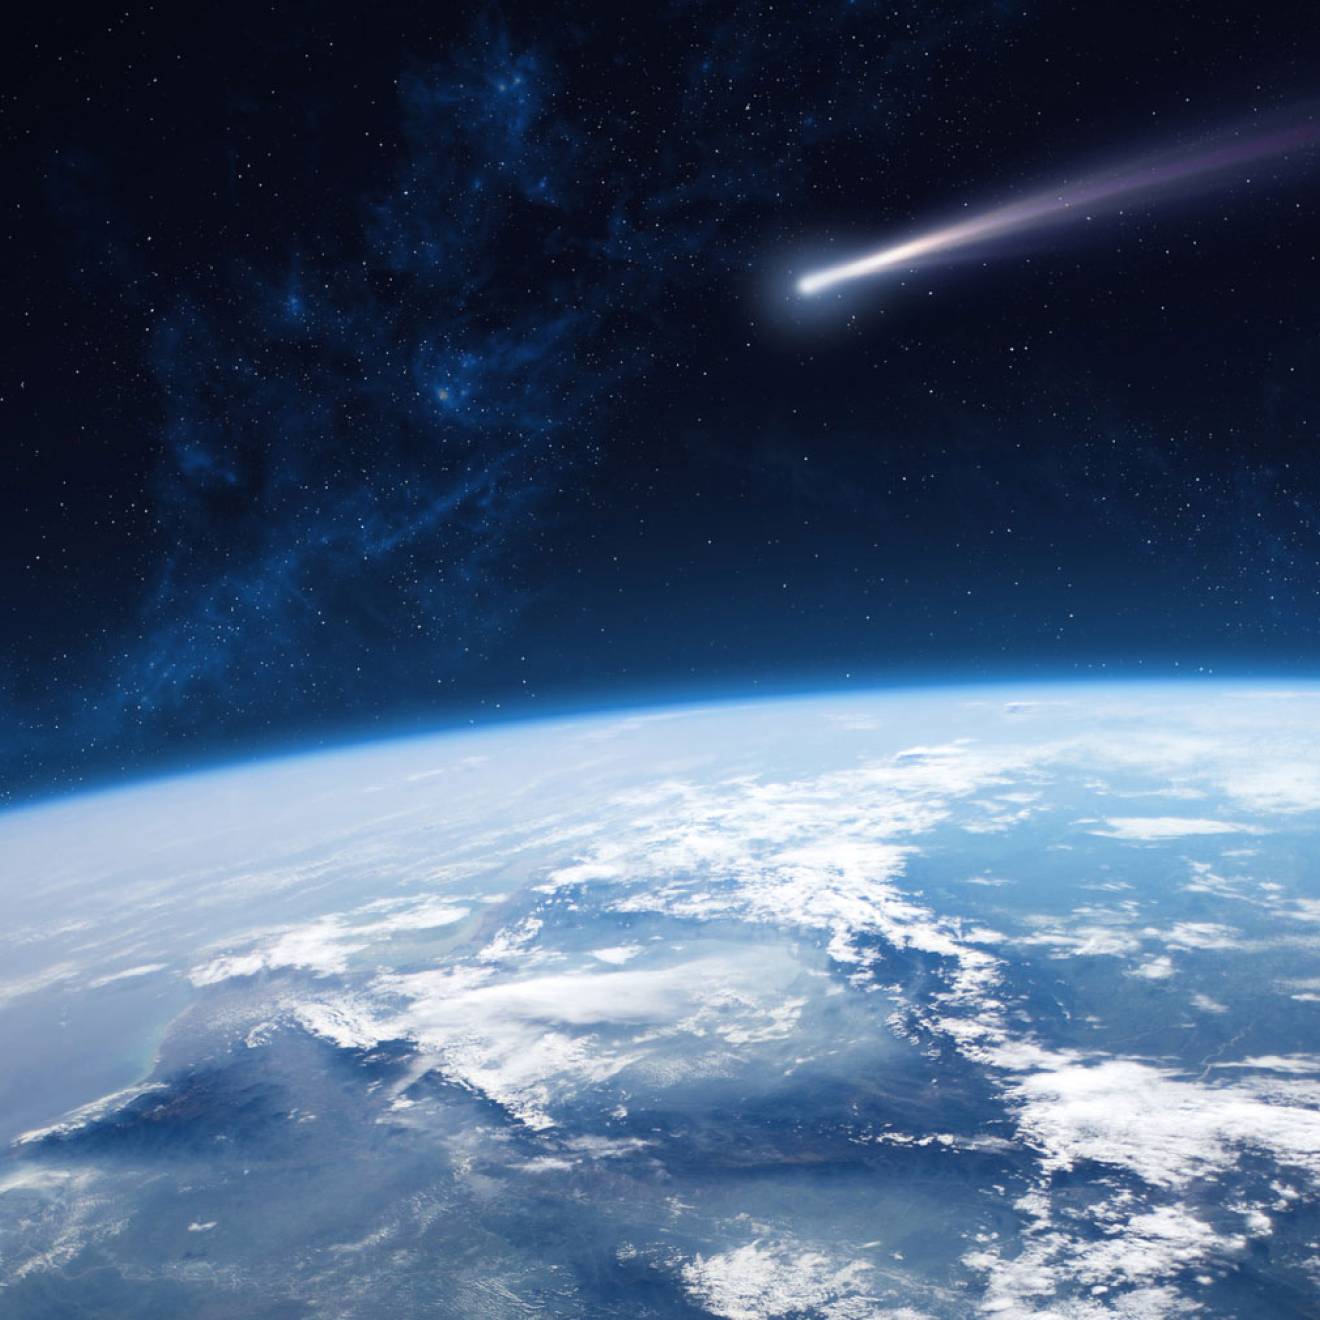 Photorealistic illustration from a spacecraft's-eye-view looking over the curve of the earth with a comet streaking through the middle of the image